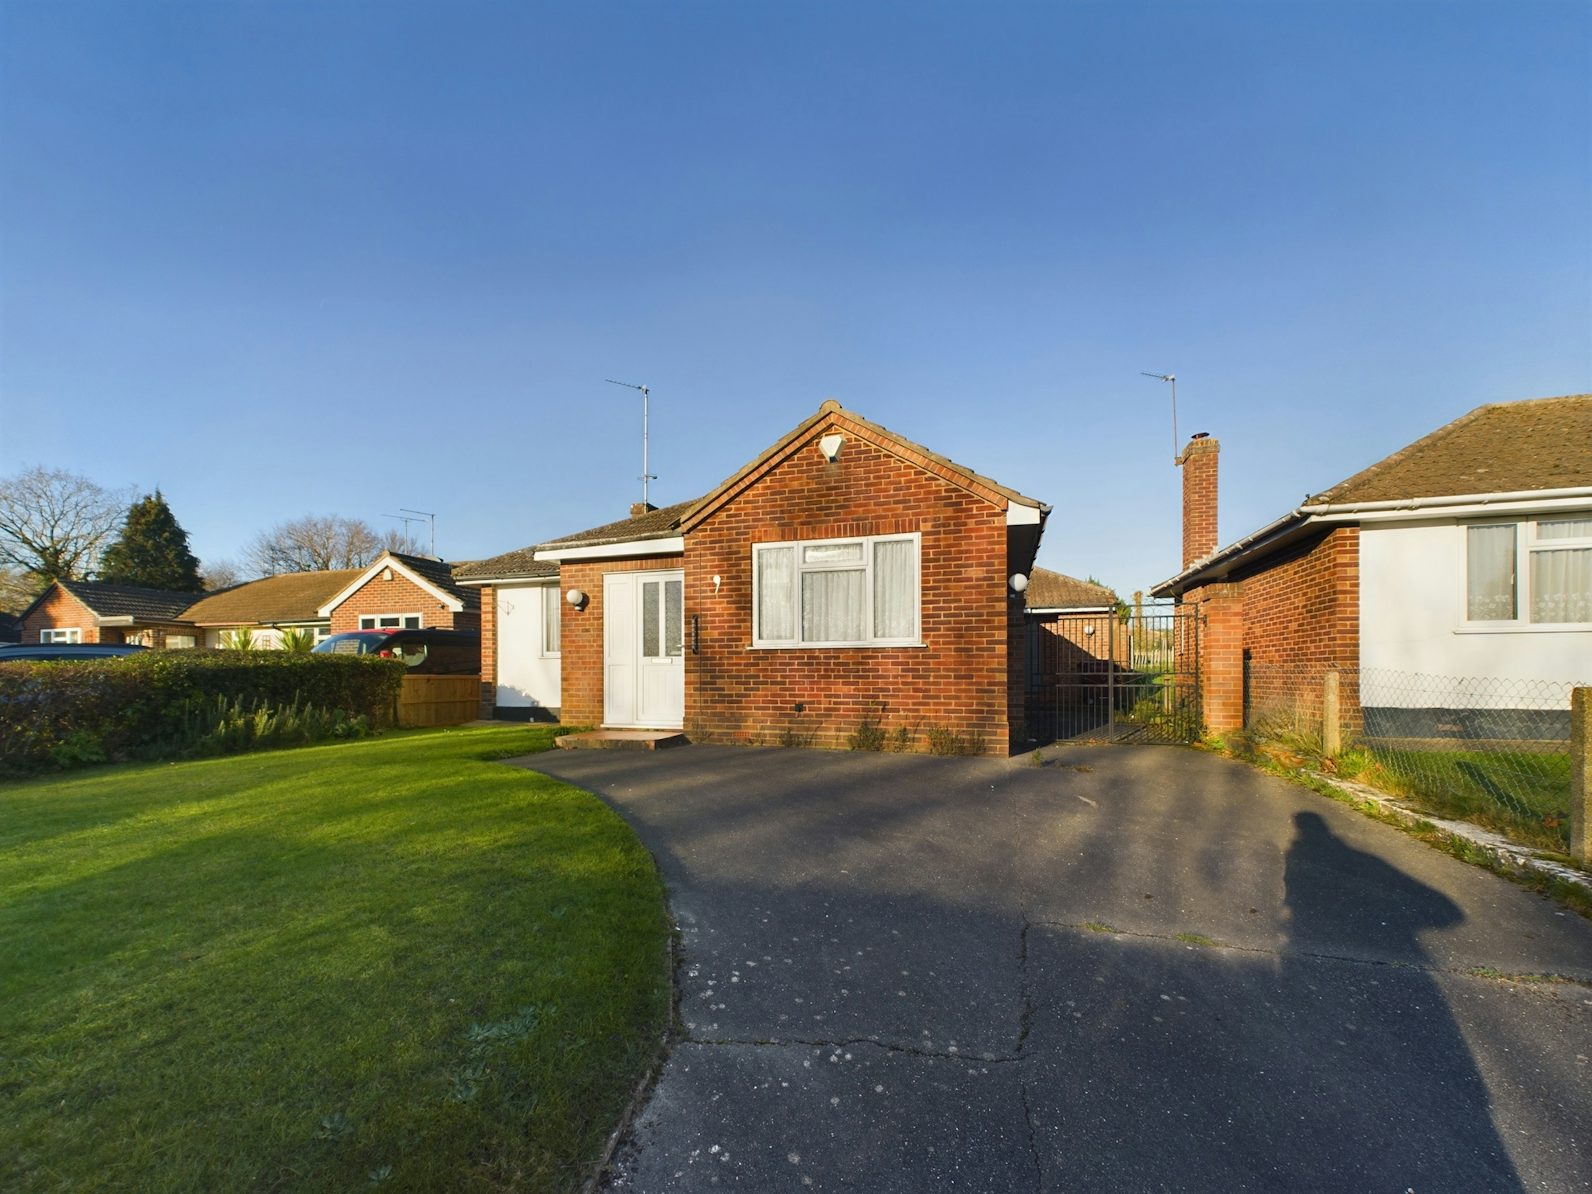 Bungalow for sale on Morlands Avenue Reading, RG30